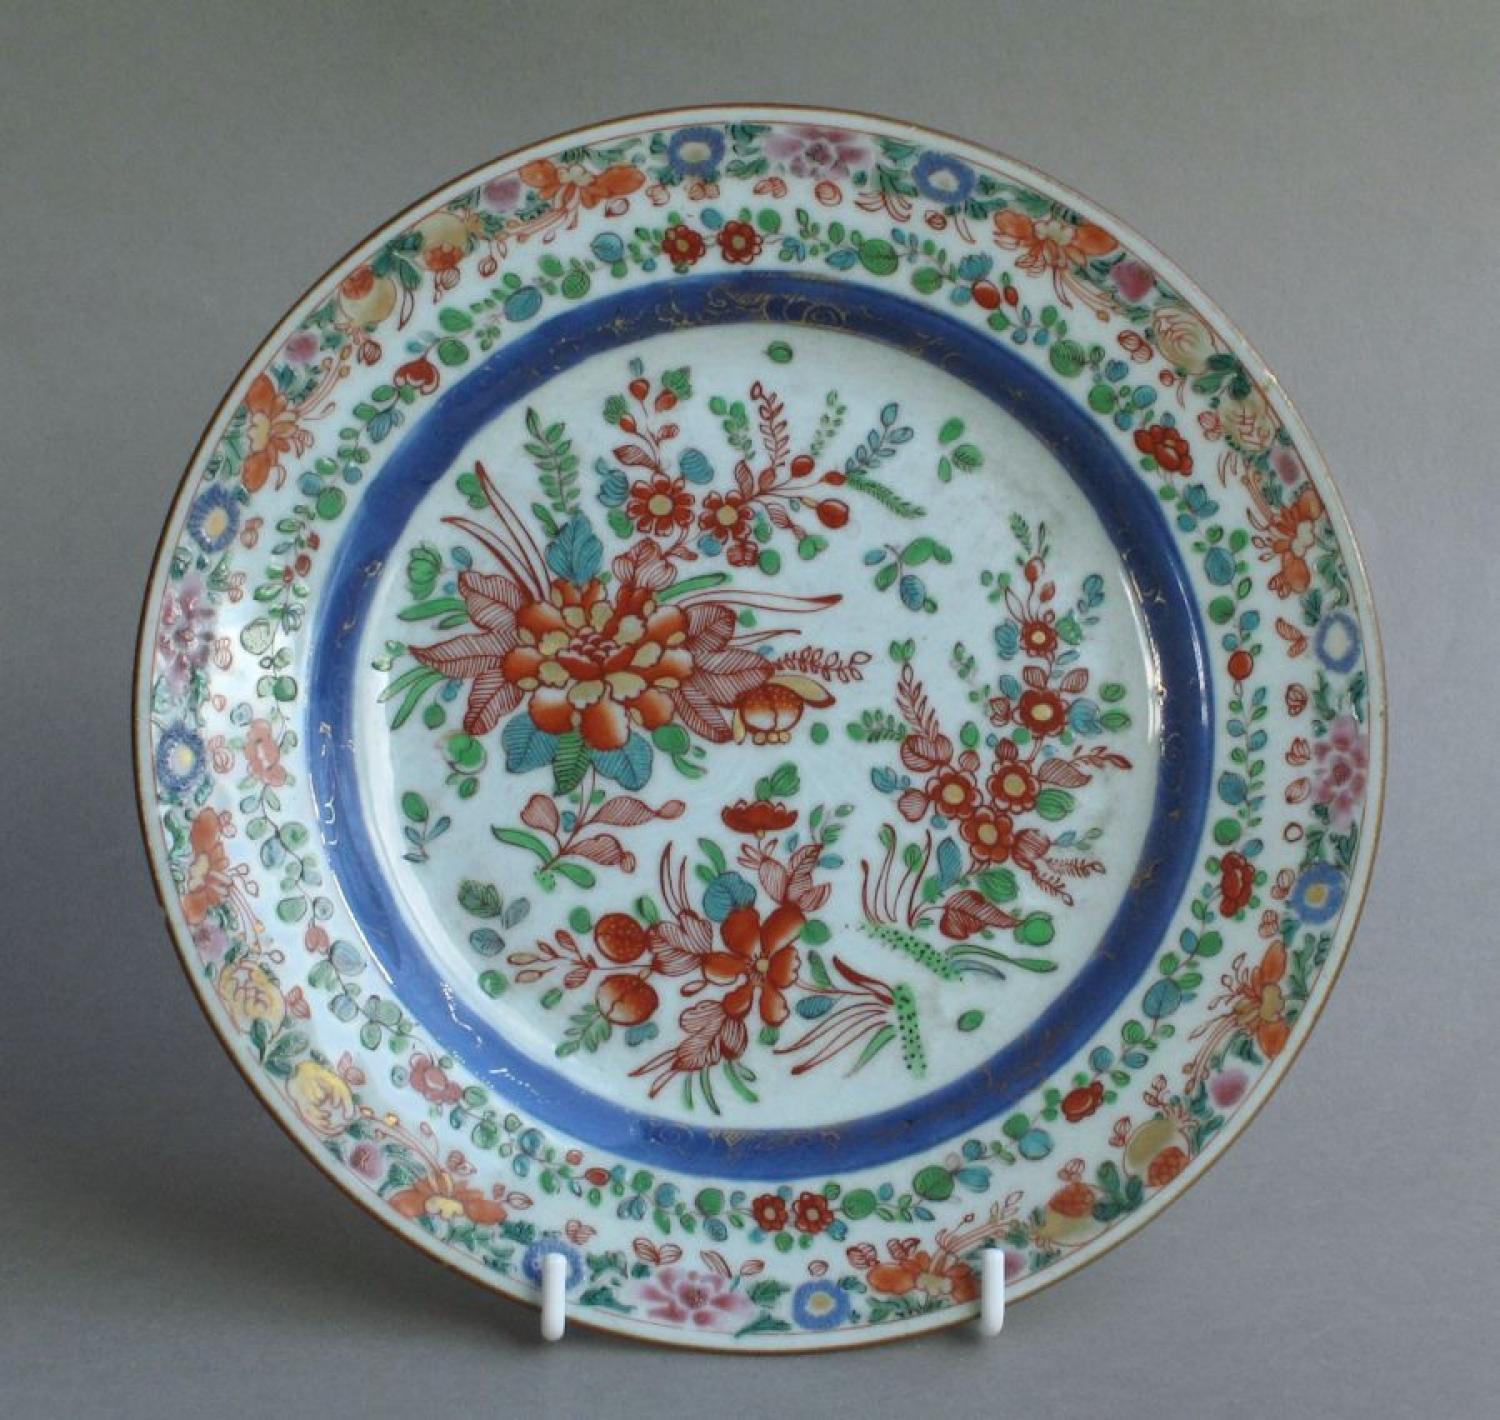 Chinese export plate with English decoration